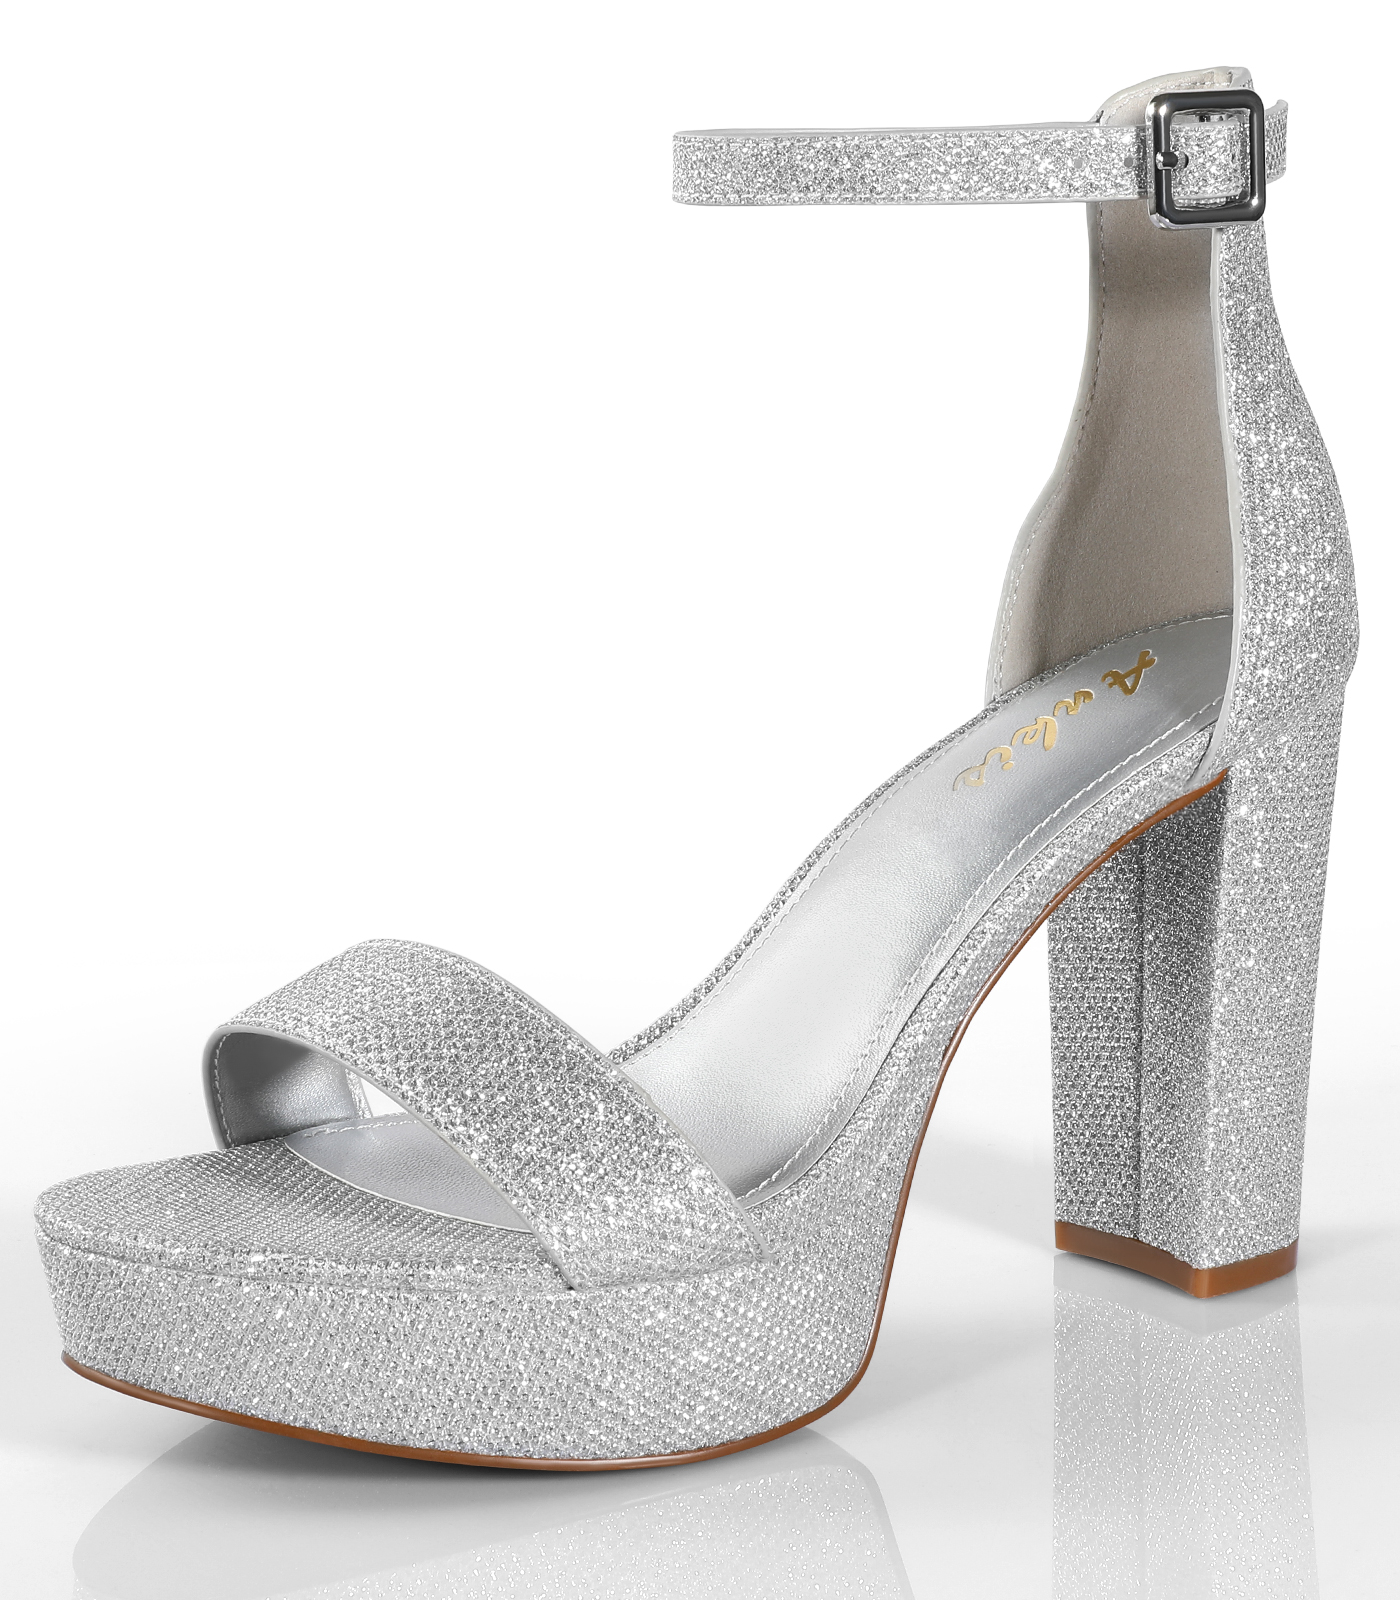 4 Inches Chunky Platform Heels Sandals-Silver